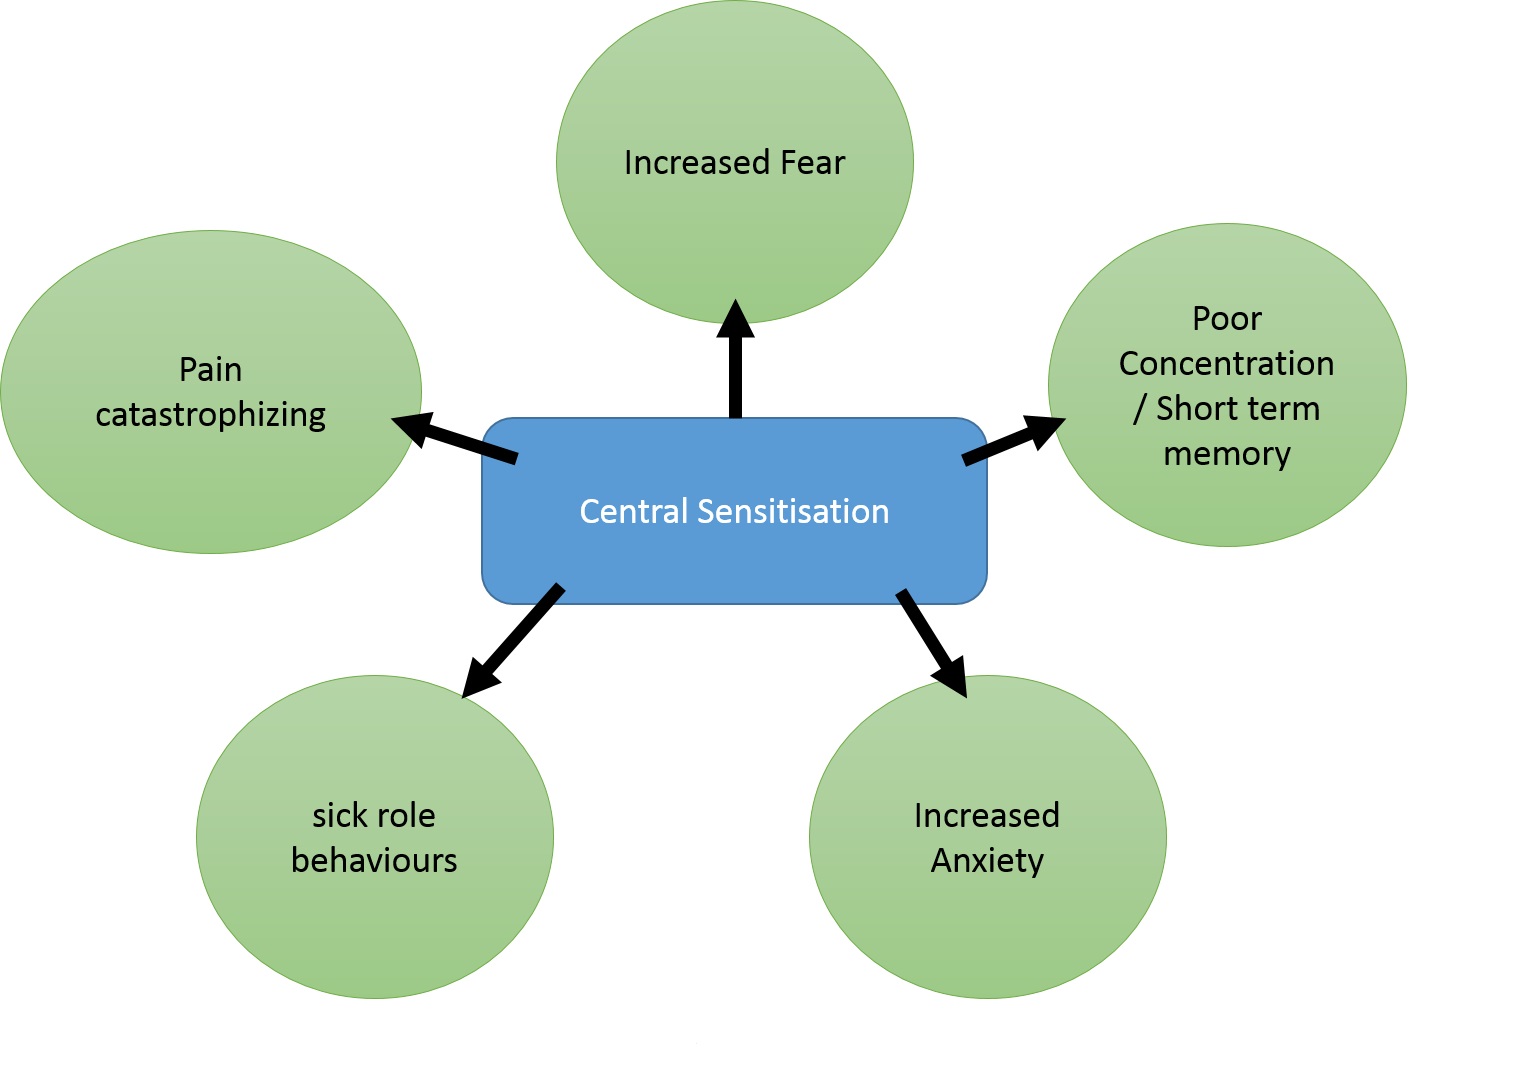 Figure 4: Systemic Effects of Central Sensitisation (McAllister, 2012)